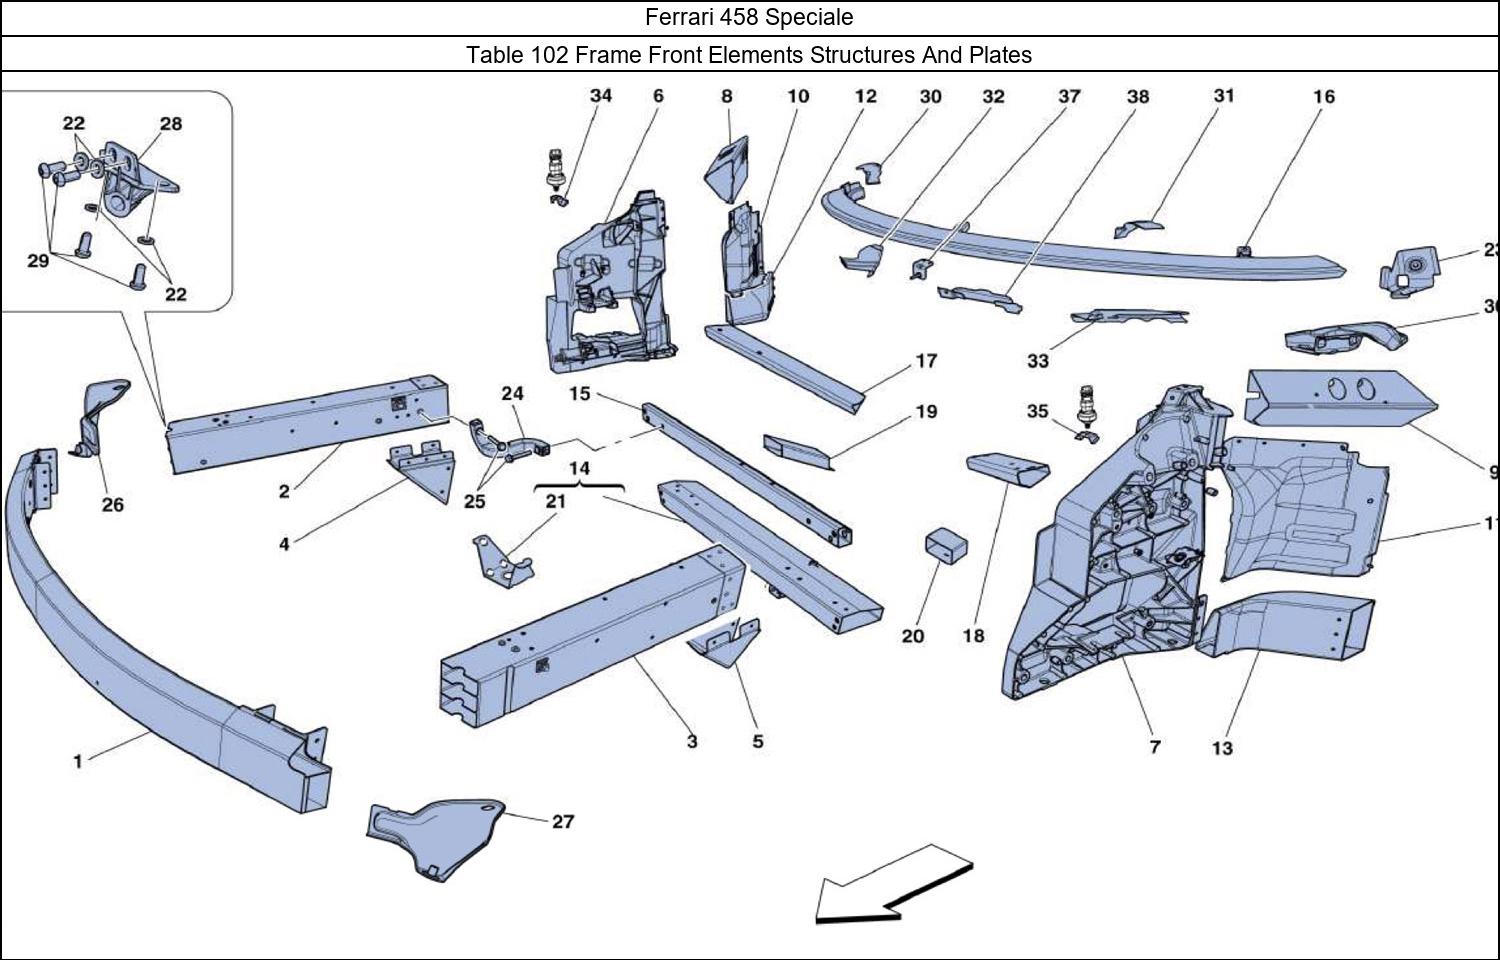 Ferrari Parts Ferrari 458 Speciale Table 102 Frame Front Elements Structures And Plates